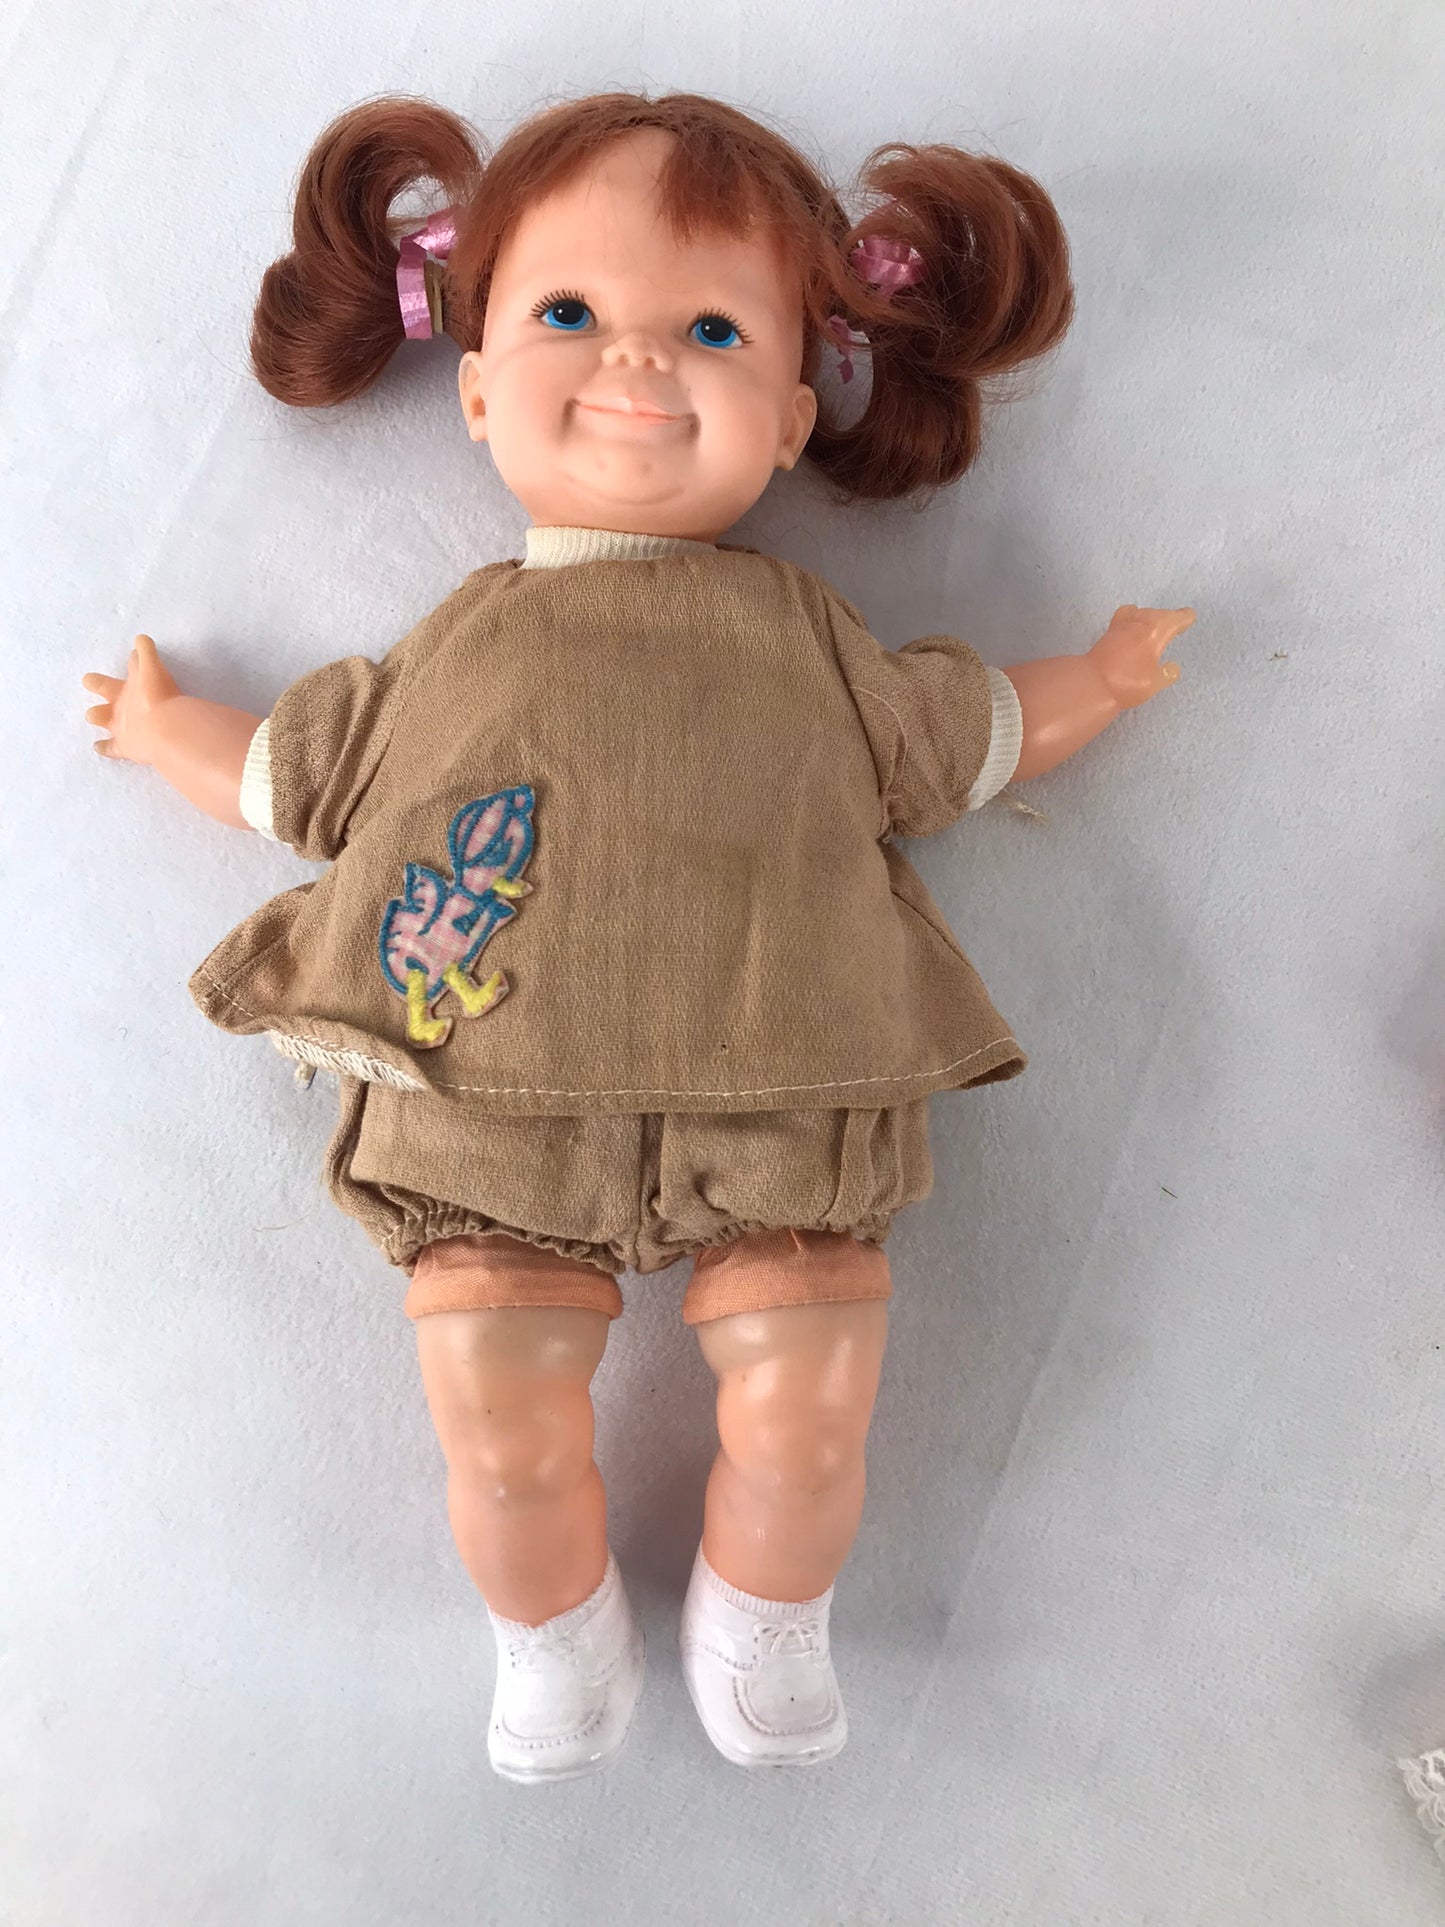 VINTAGE IDEAL TOY CORP. PULL STRING DOLL TODDLER THUMBELINA 10 Inch AUBURN HAIR WITH ORIGINAL OUTFITS PULL STRING USUALLY WORKS